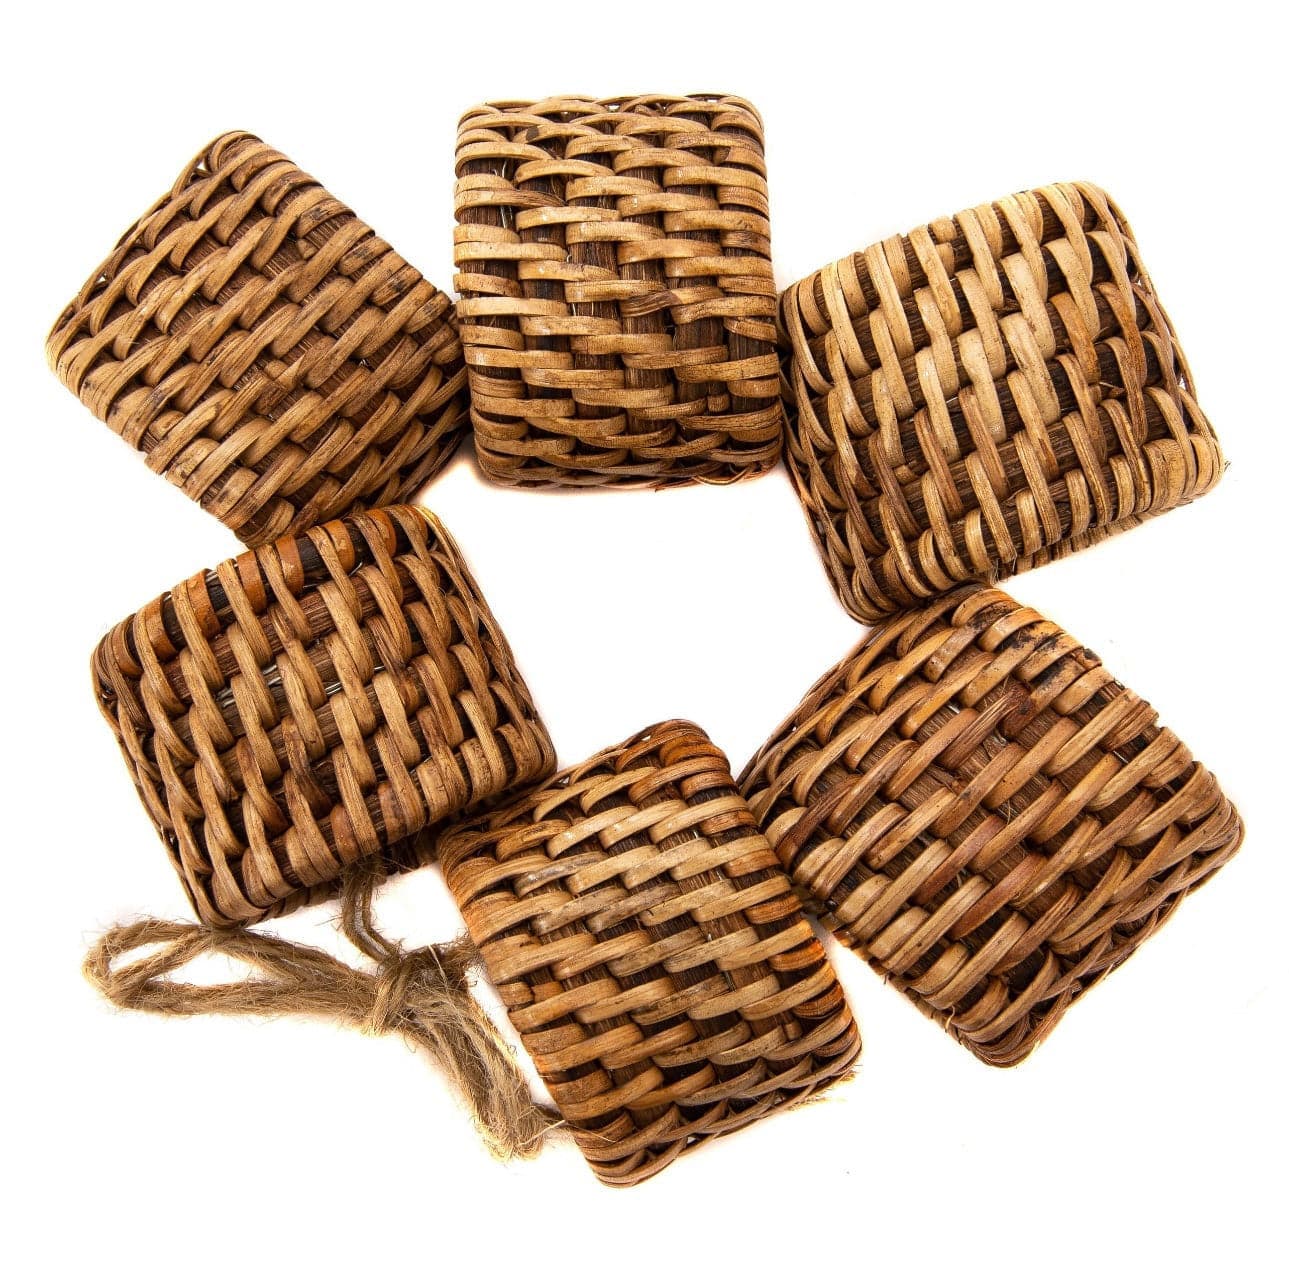 The Carpentry Shop Co. Honey Brown Rattan Oval Napkin Rings